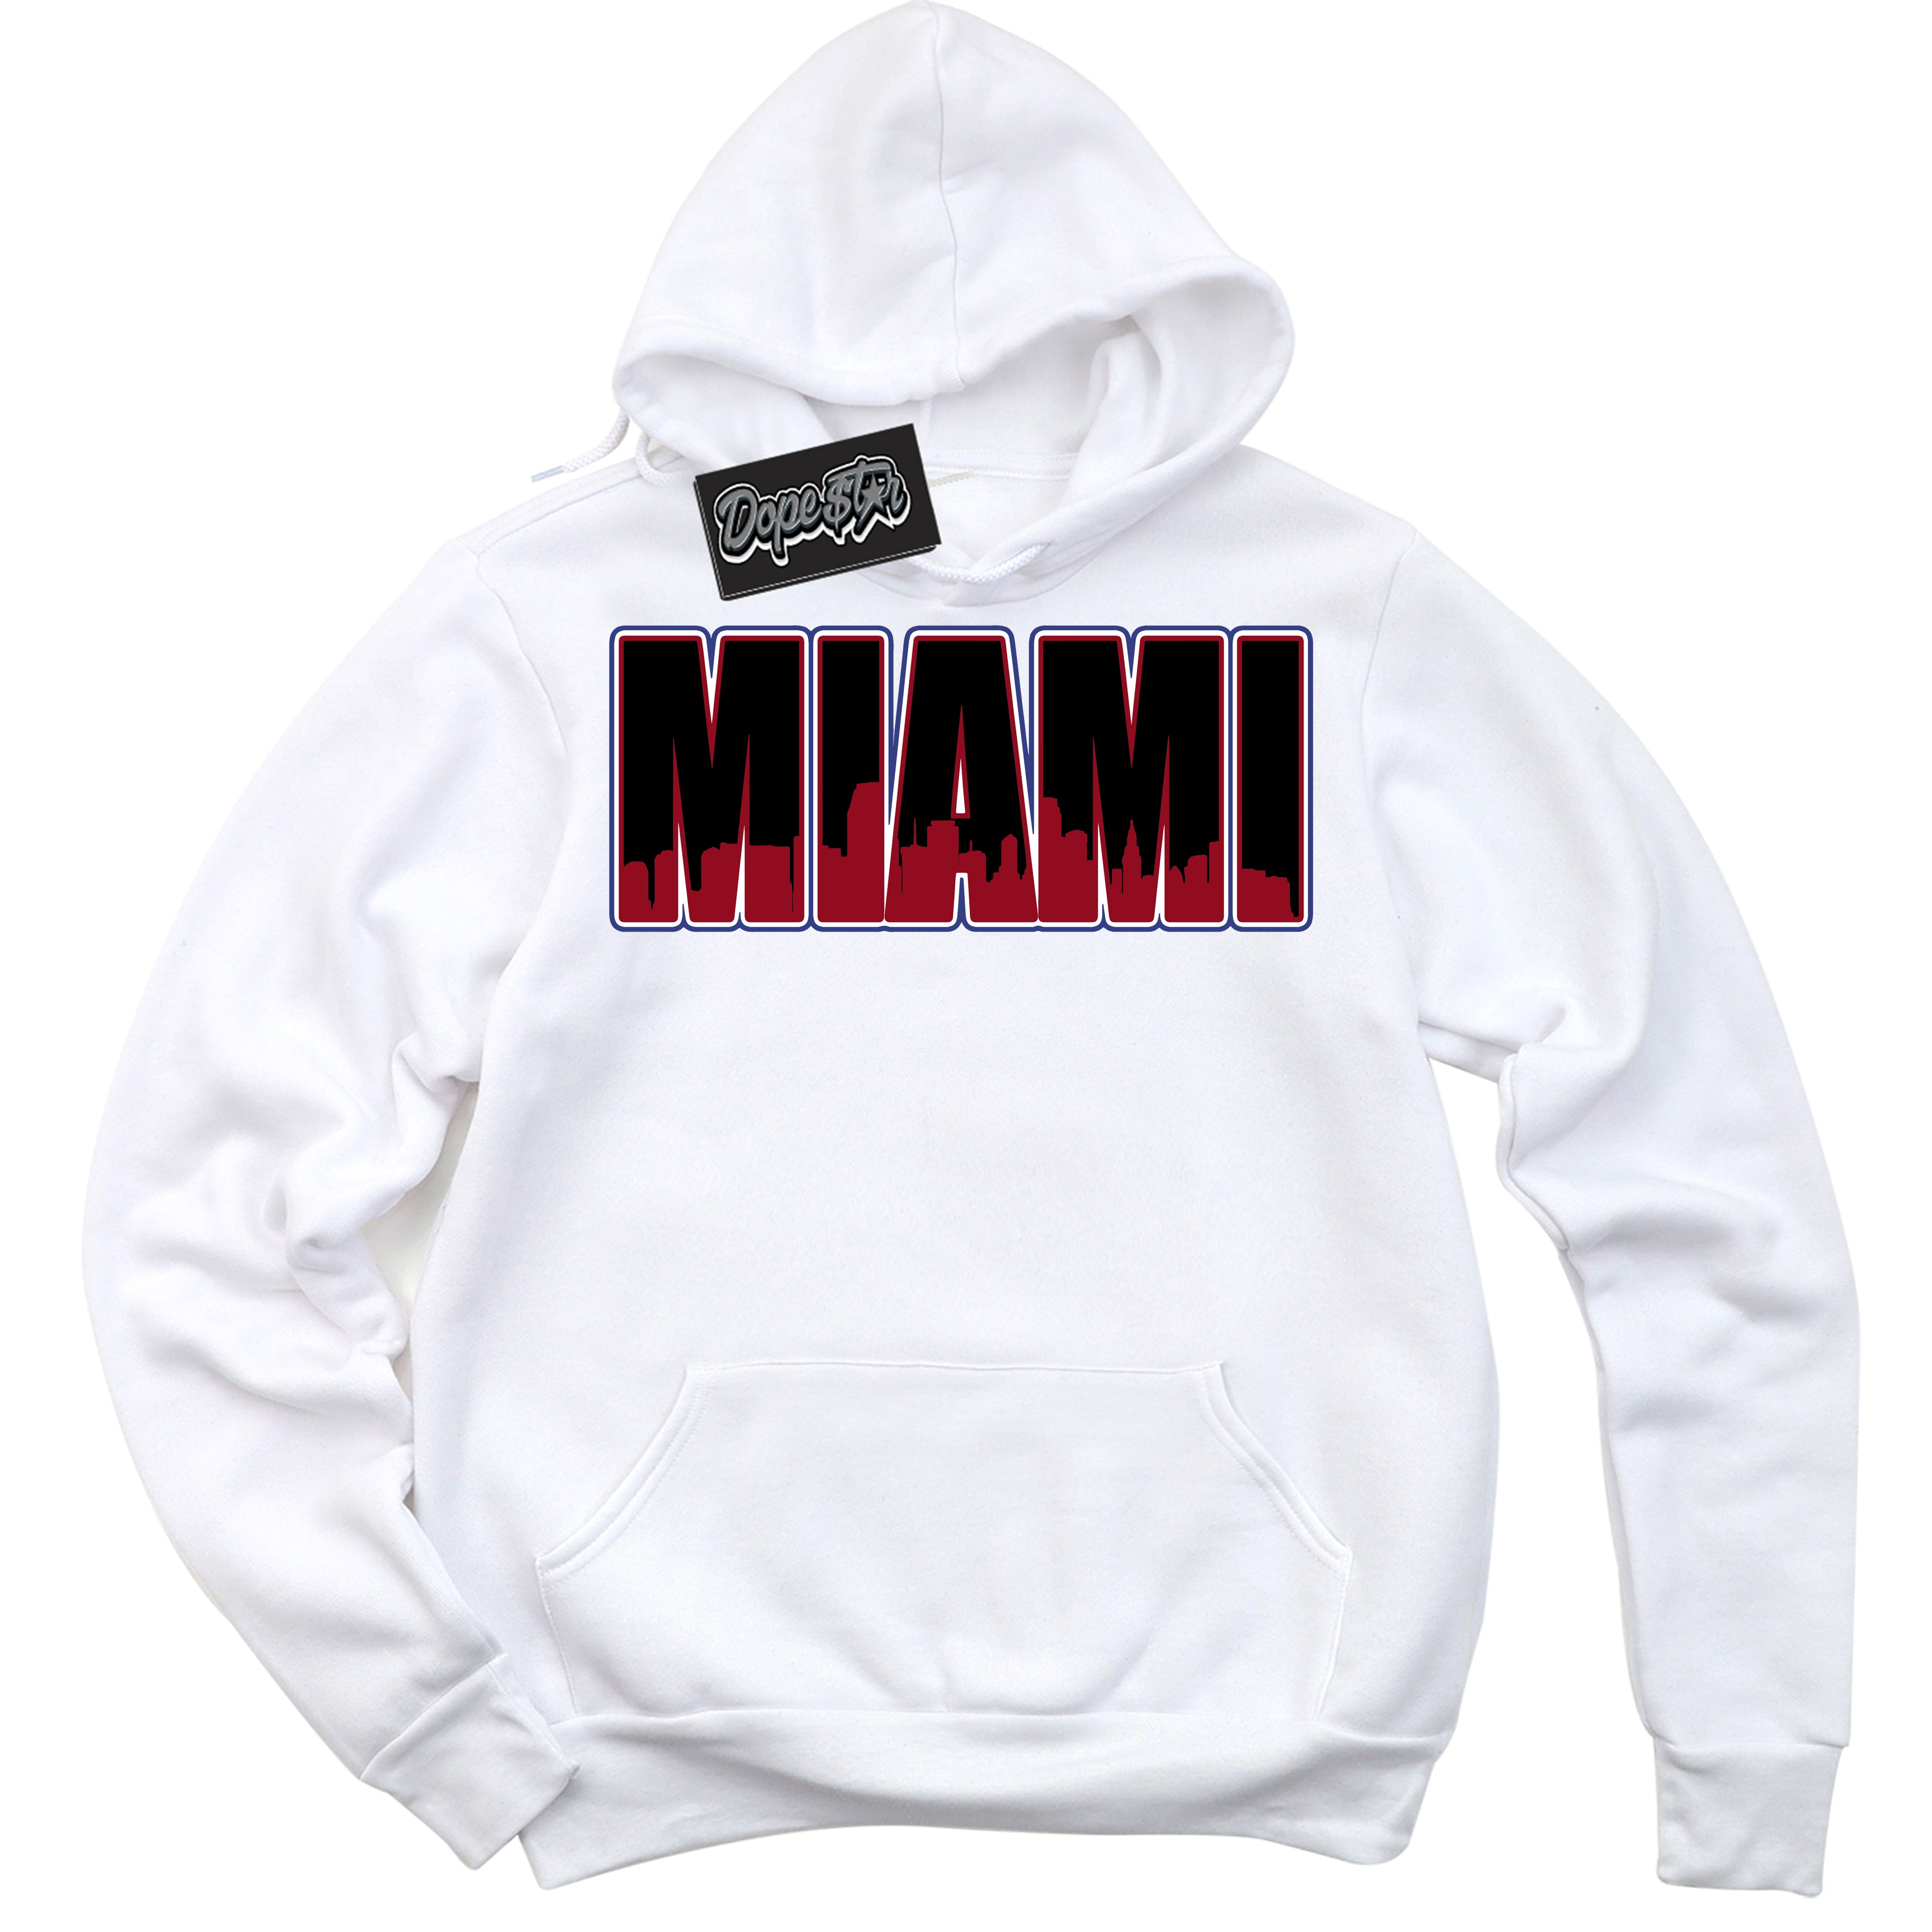 Cool White Hoodie with “ Miami ”  design that Perfectly Matches Playoffs 8s Sneakers.